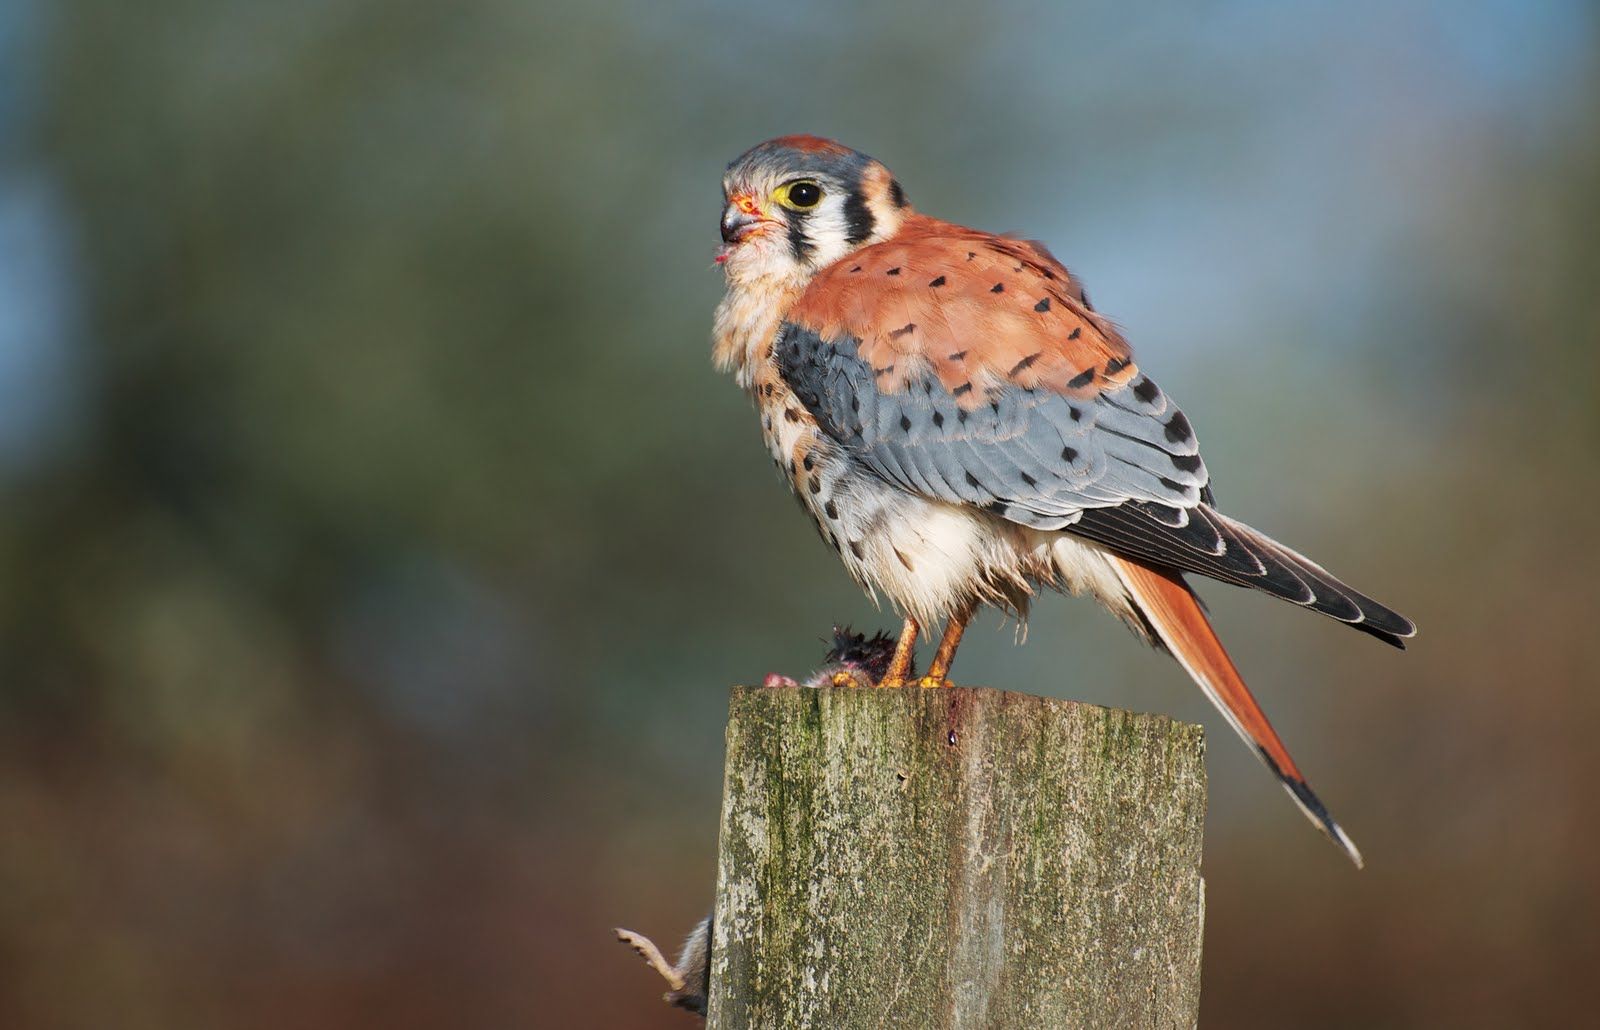 American Kestrel on a stump photo and wallpaper. All American Kestrel on a stump picture